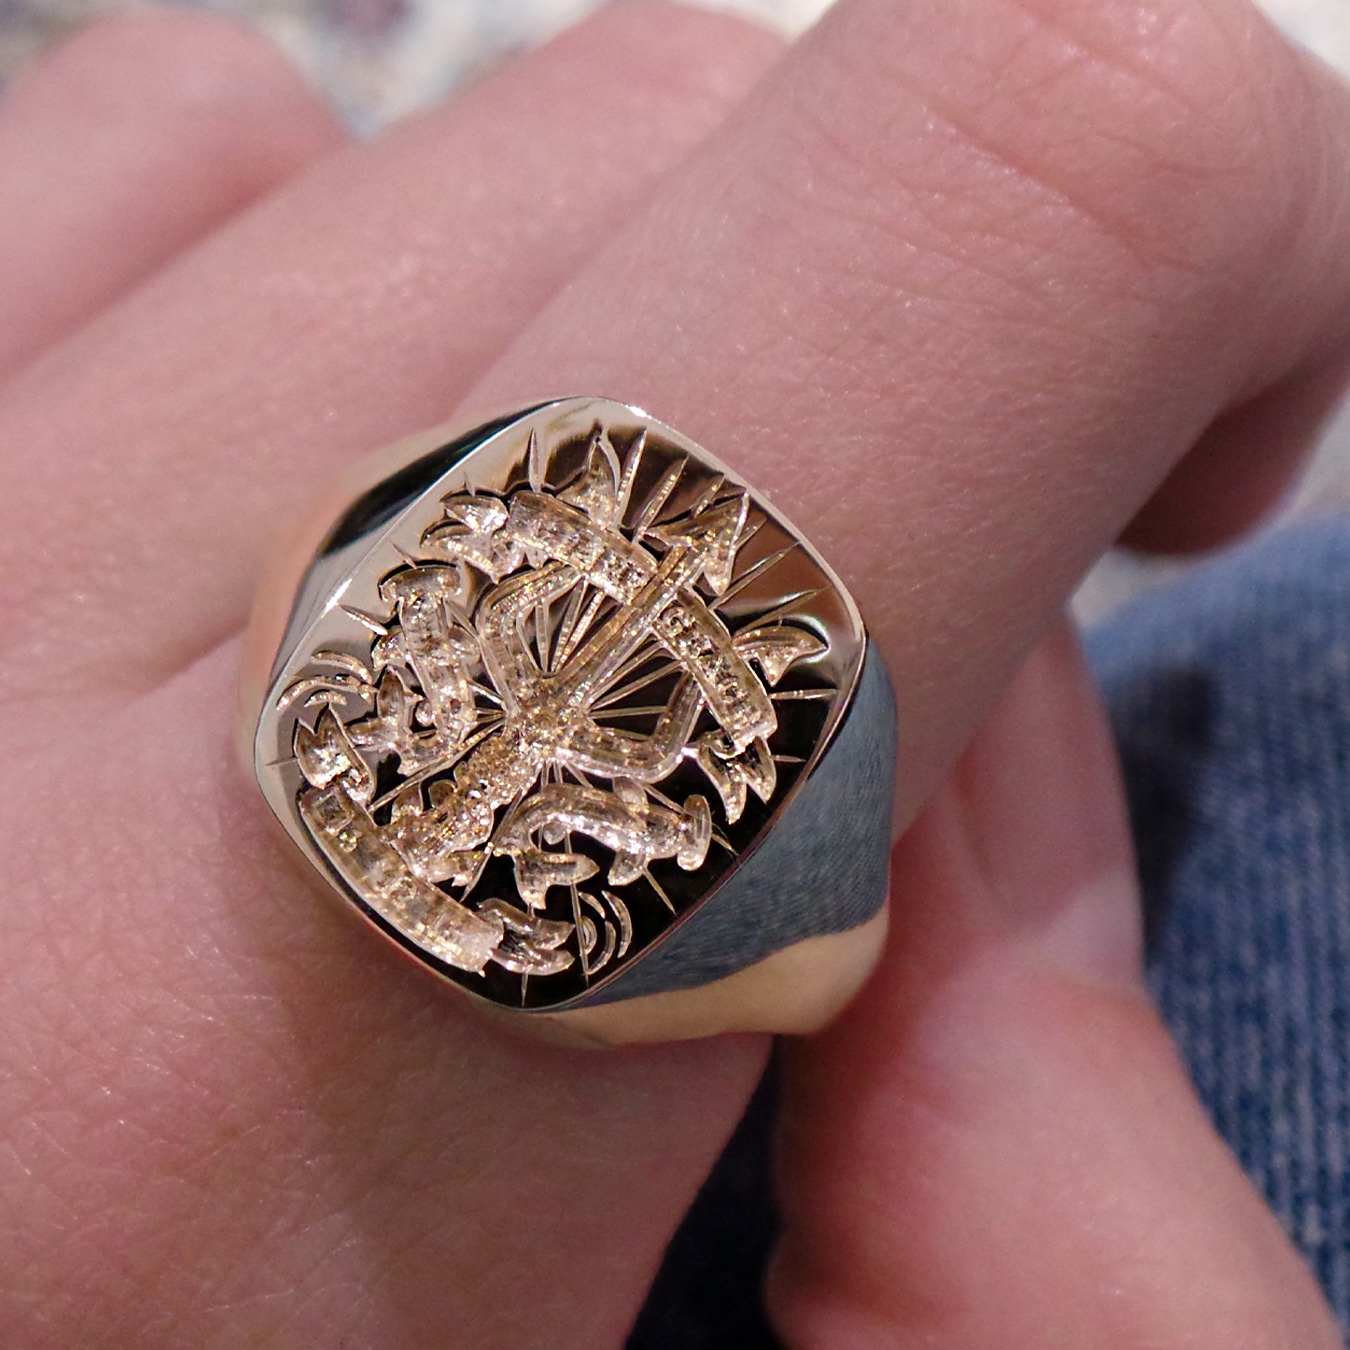 Hammerhead Signet Ring, by Rebus. 9K Yellow Gold 16x13mm Cushion Signet Ring with Bespoke Seal Engraving